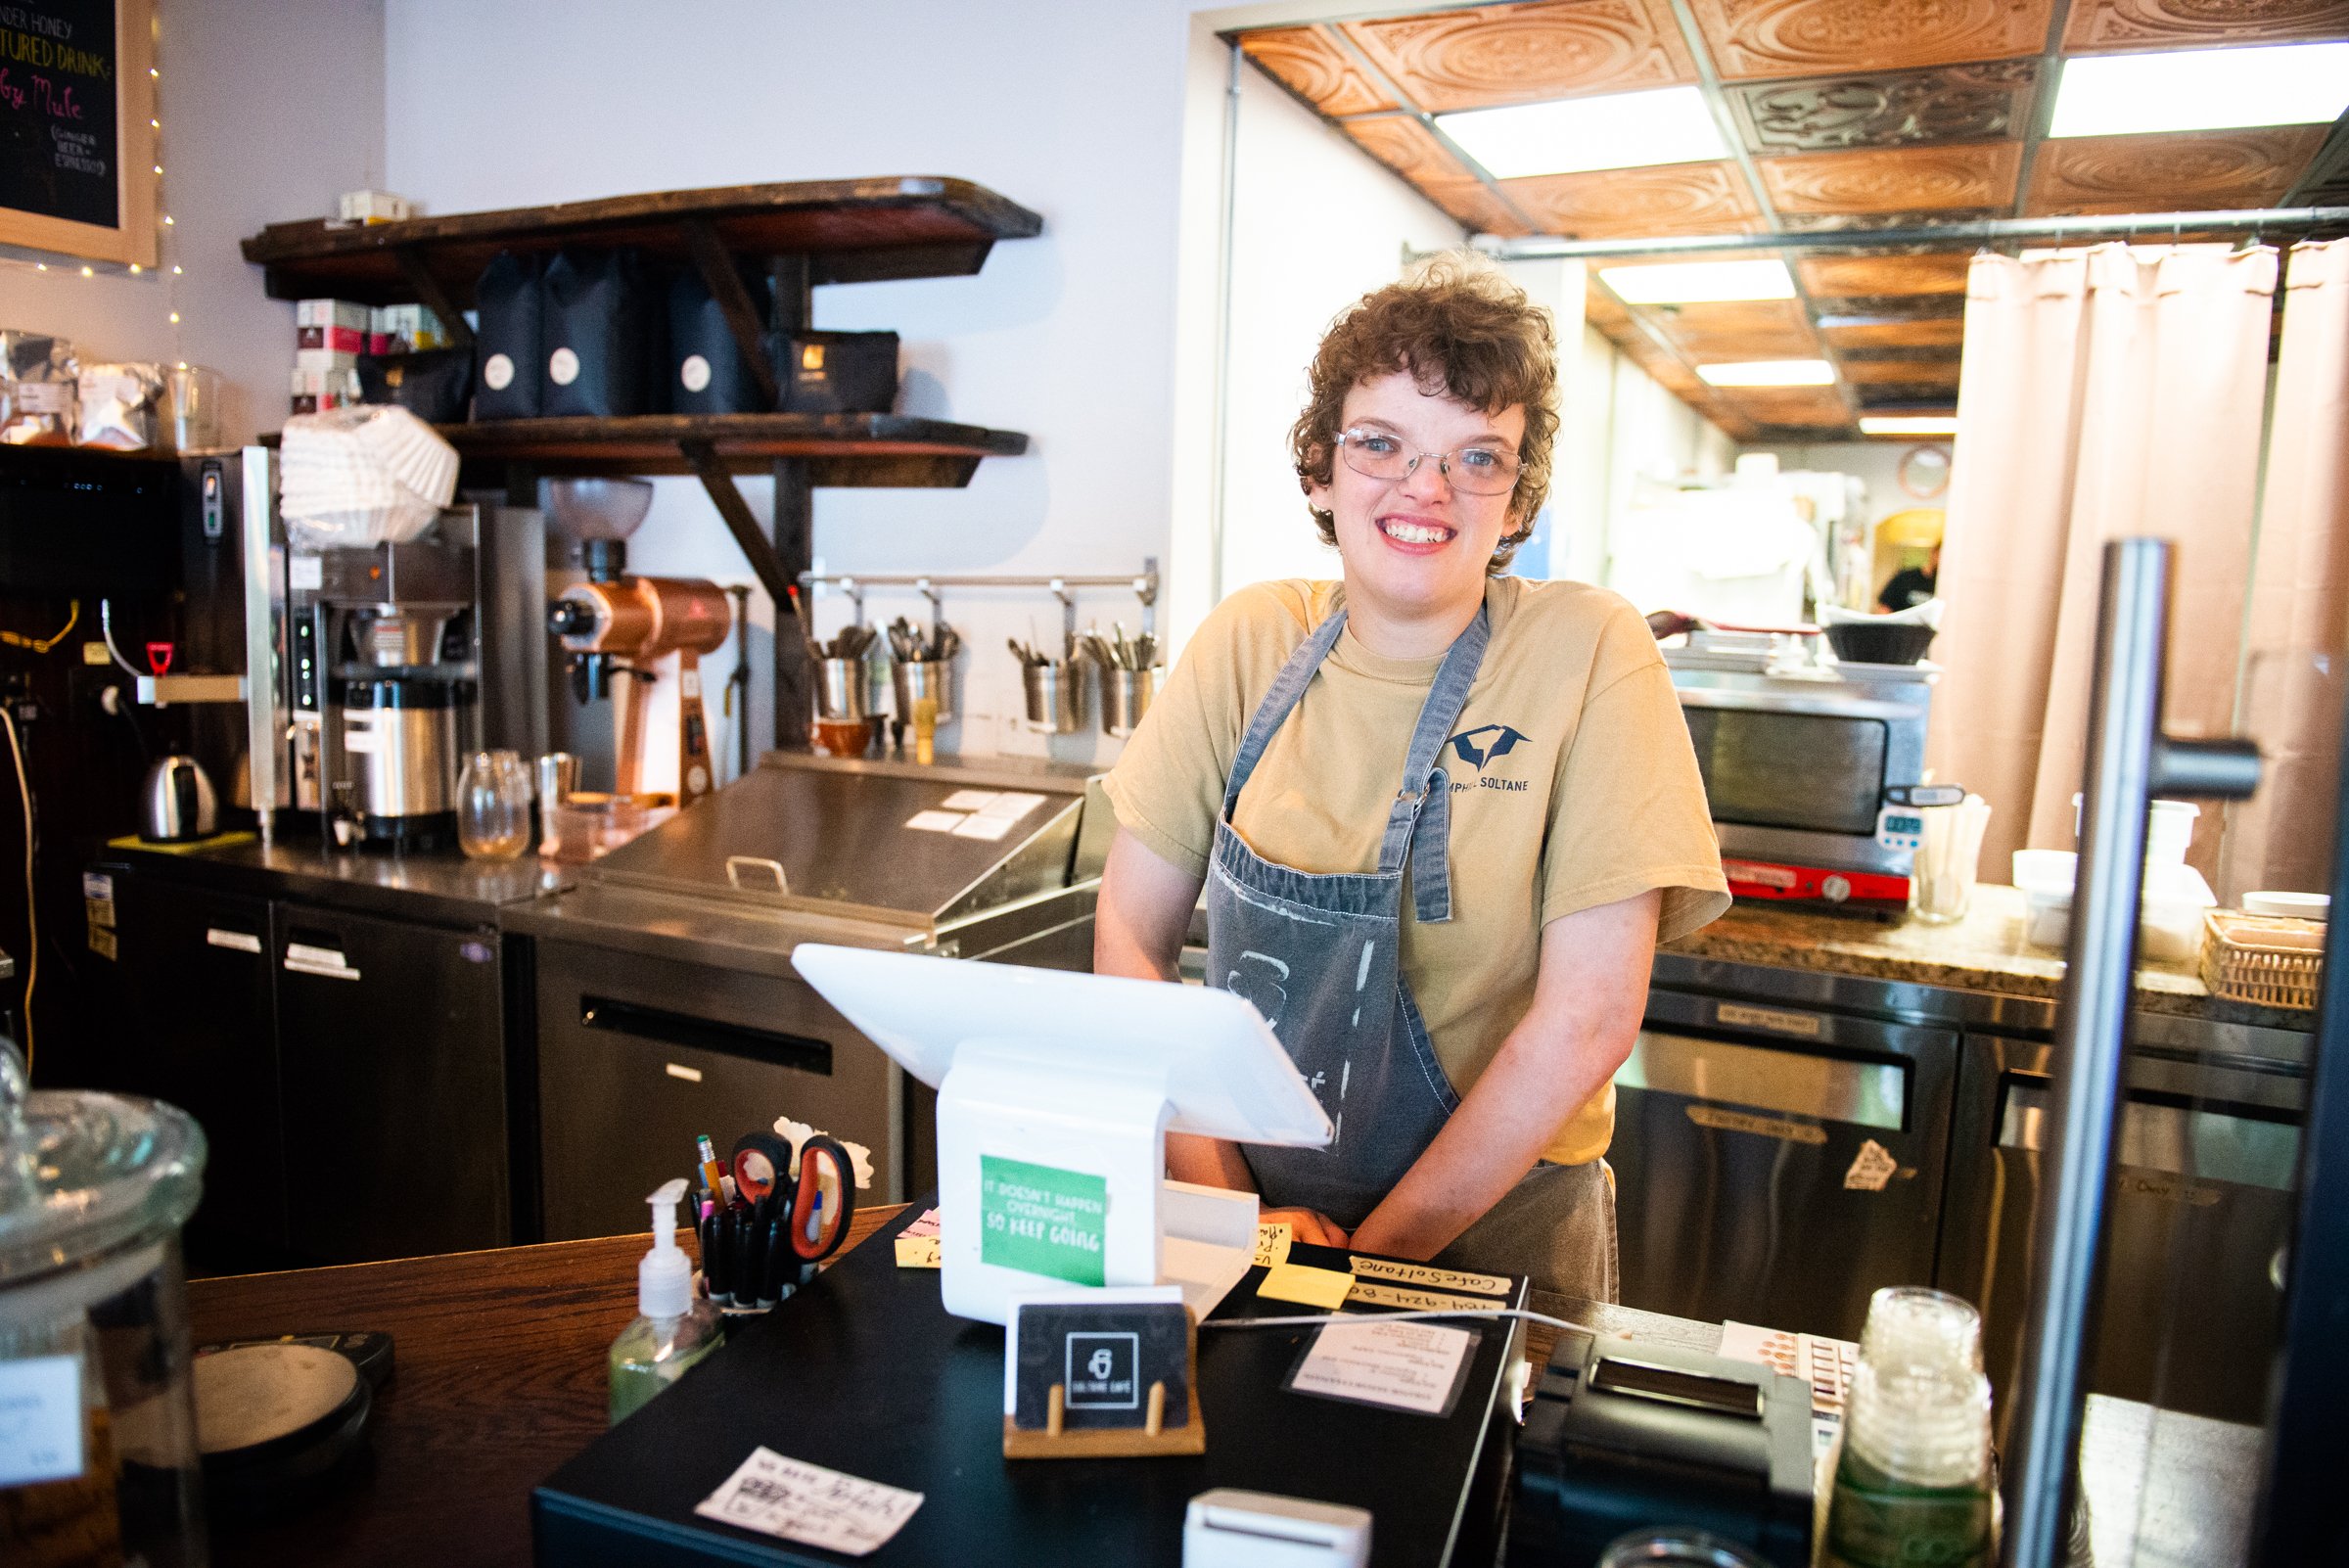 Cashier Kathleen R. working the register and greeting customers at Soltane Café.